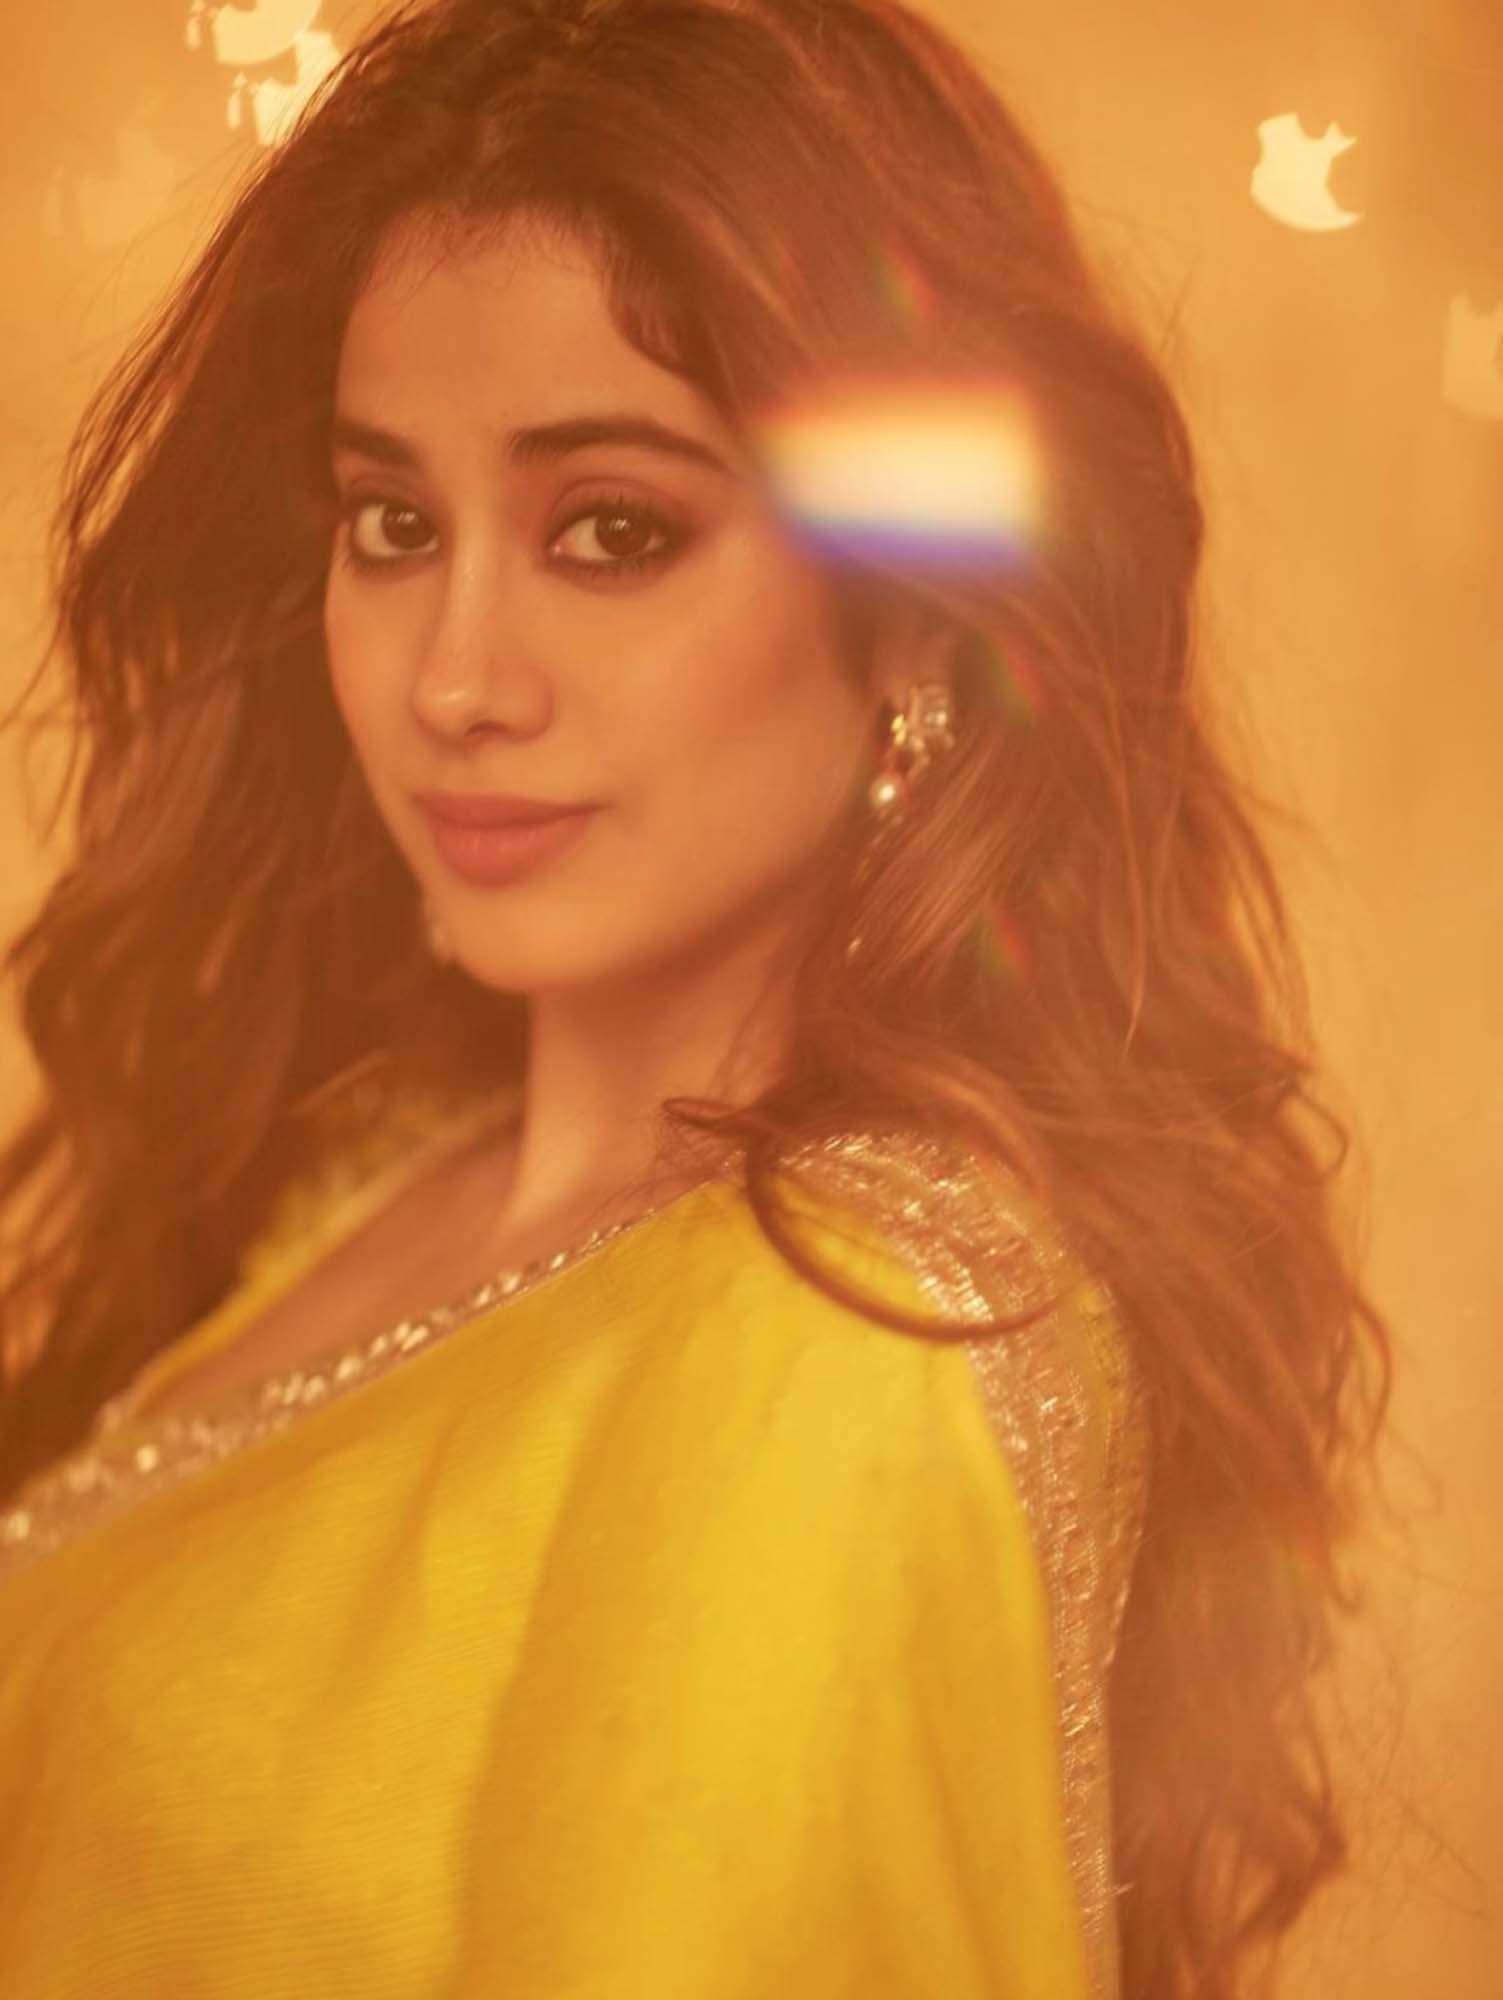 Janhvi Kapoor bears uncanny resemblance to mother Sridevi in these pictures